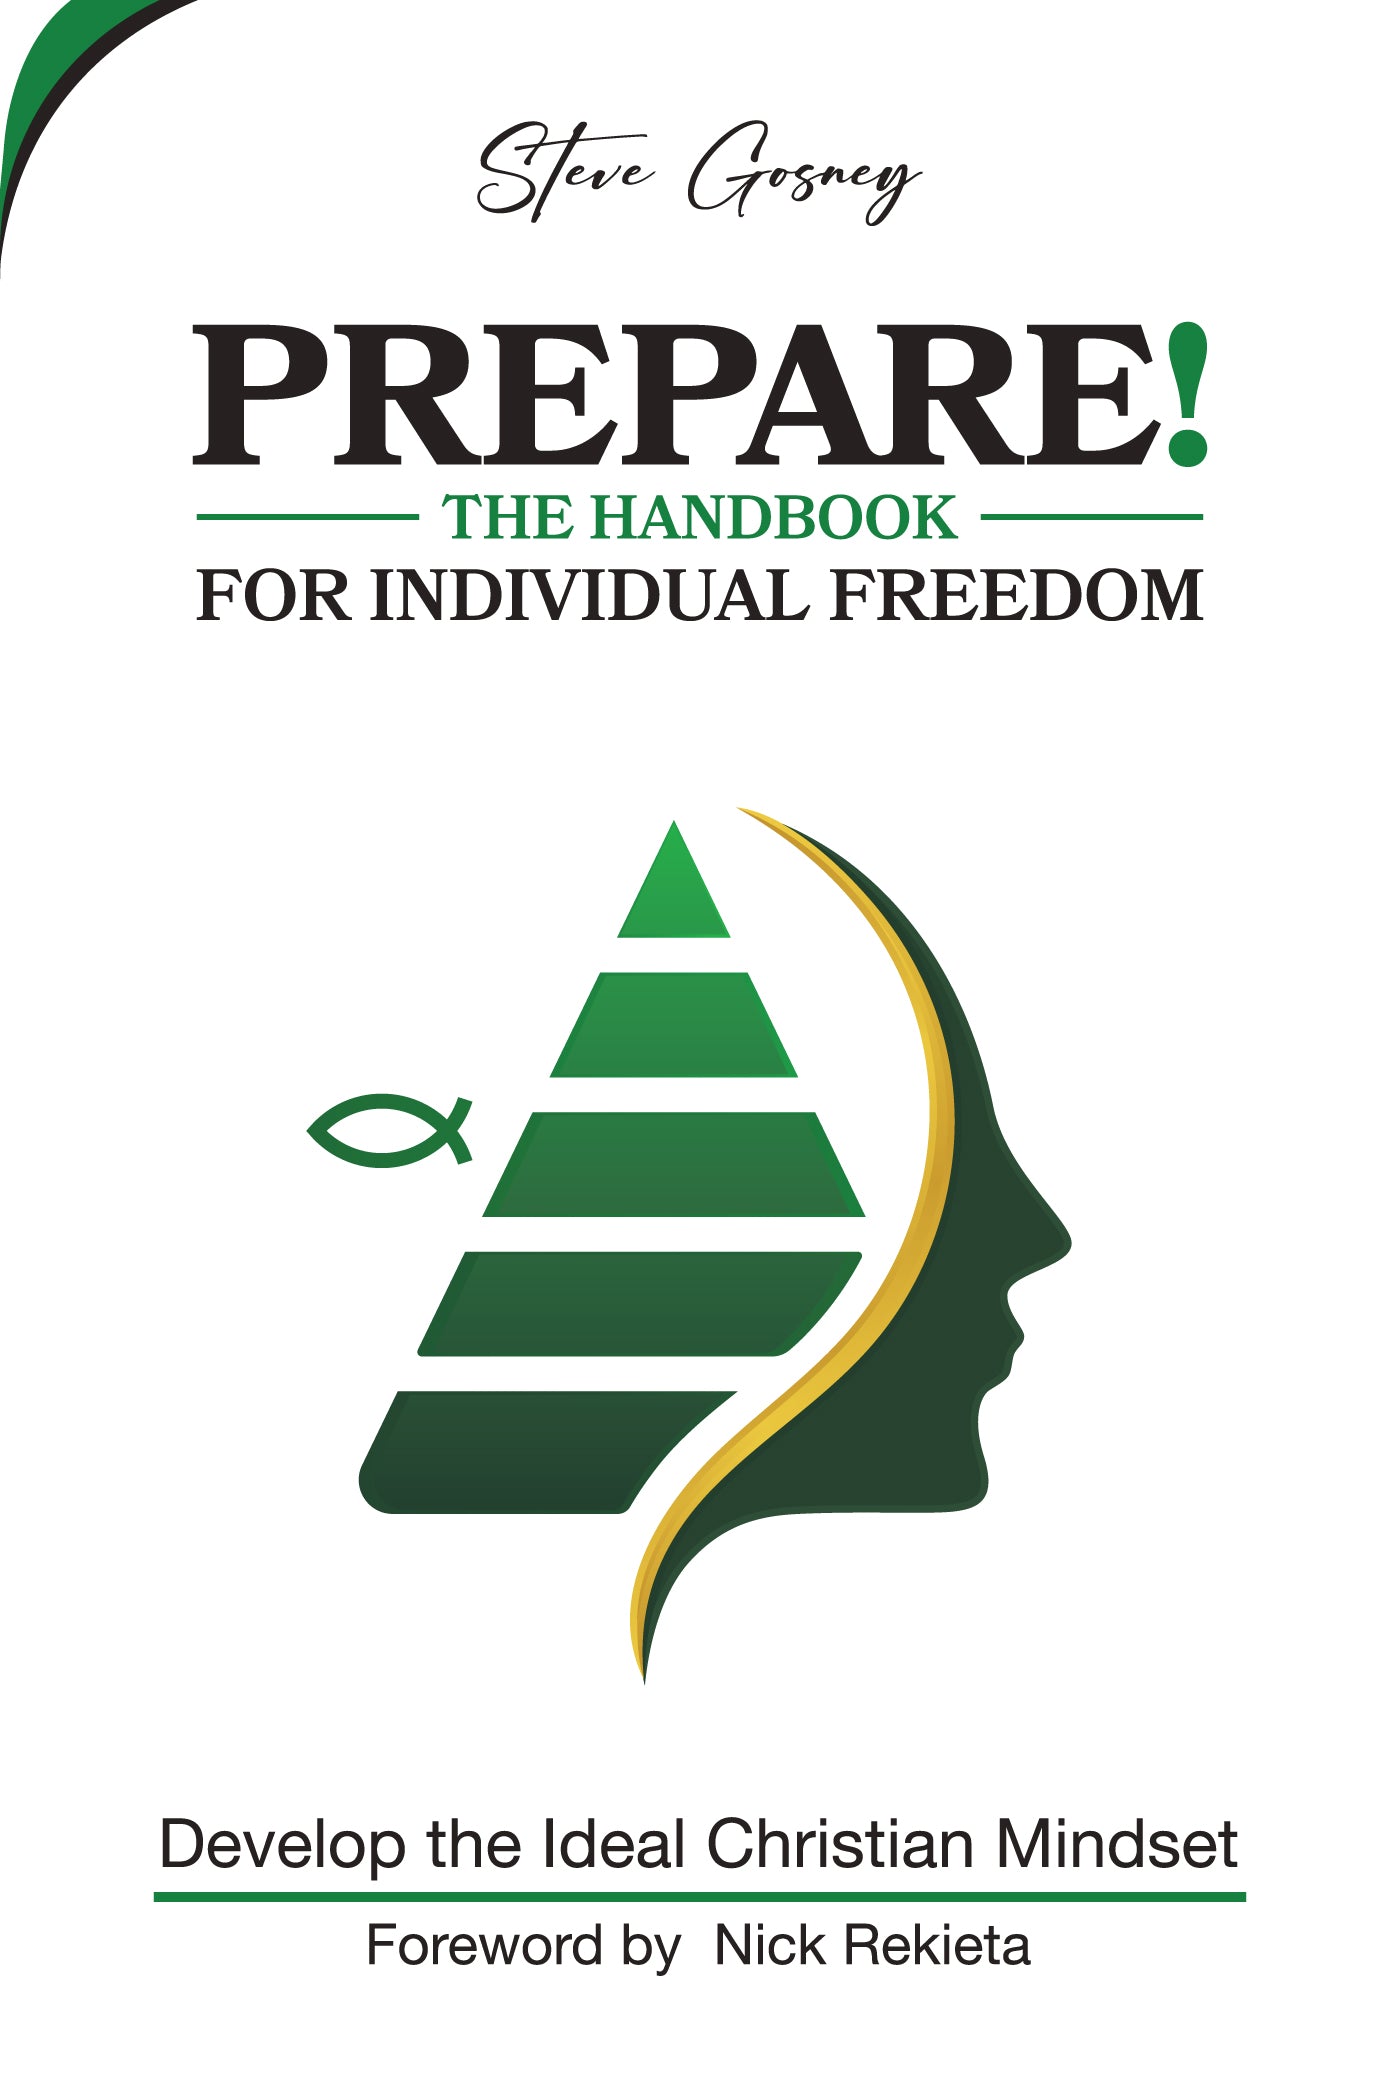 Hardcover limited edition Prepare! The Handbook for Individual Freedom book - only 9 available